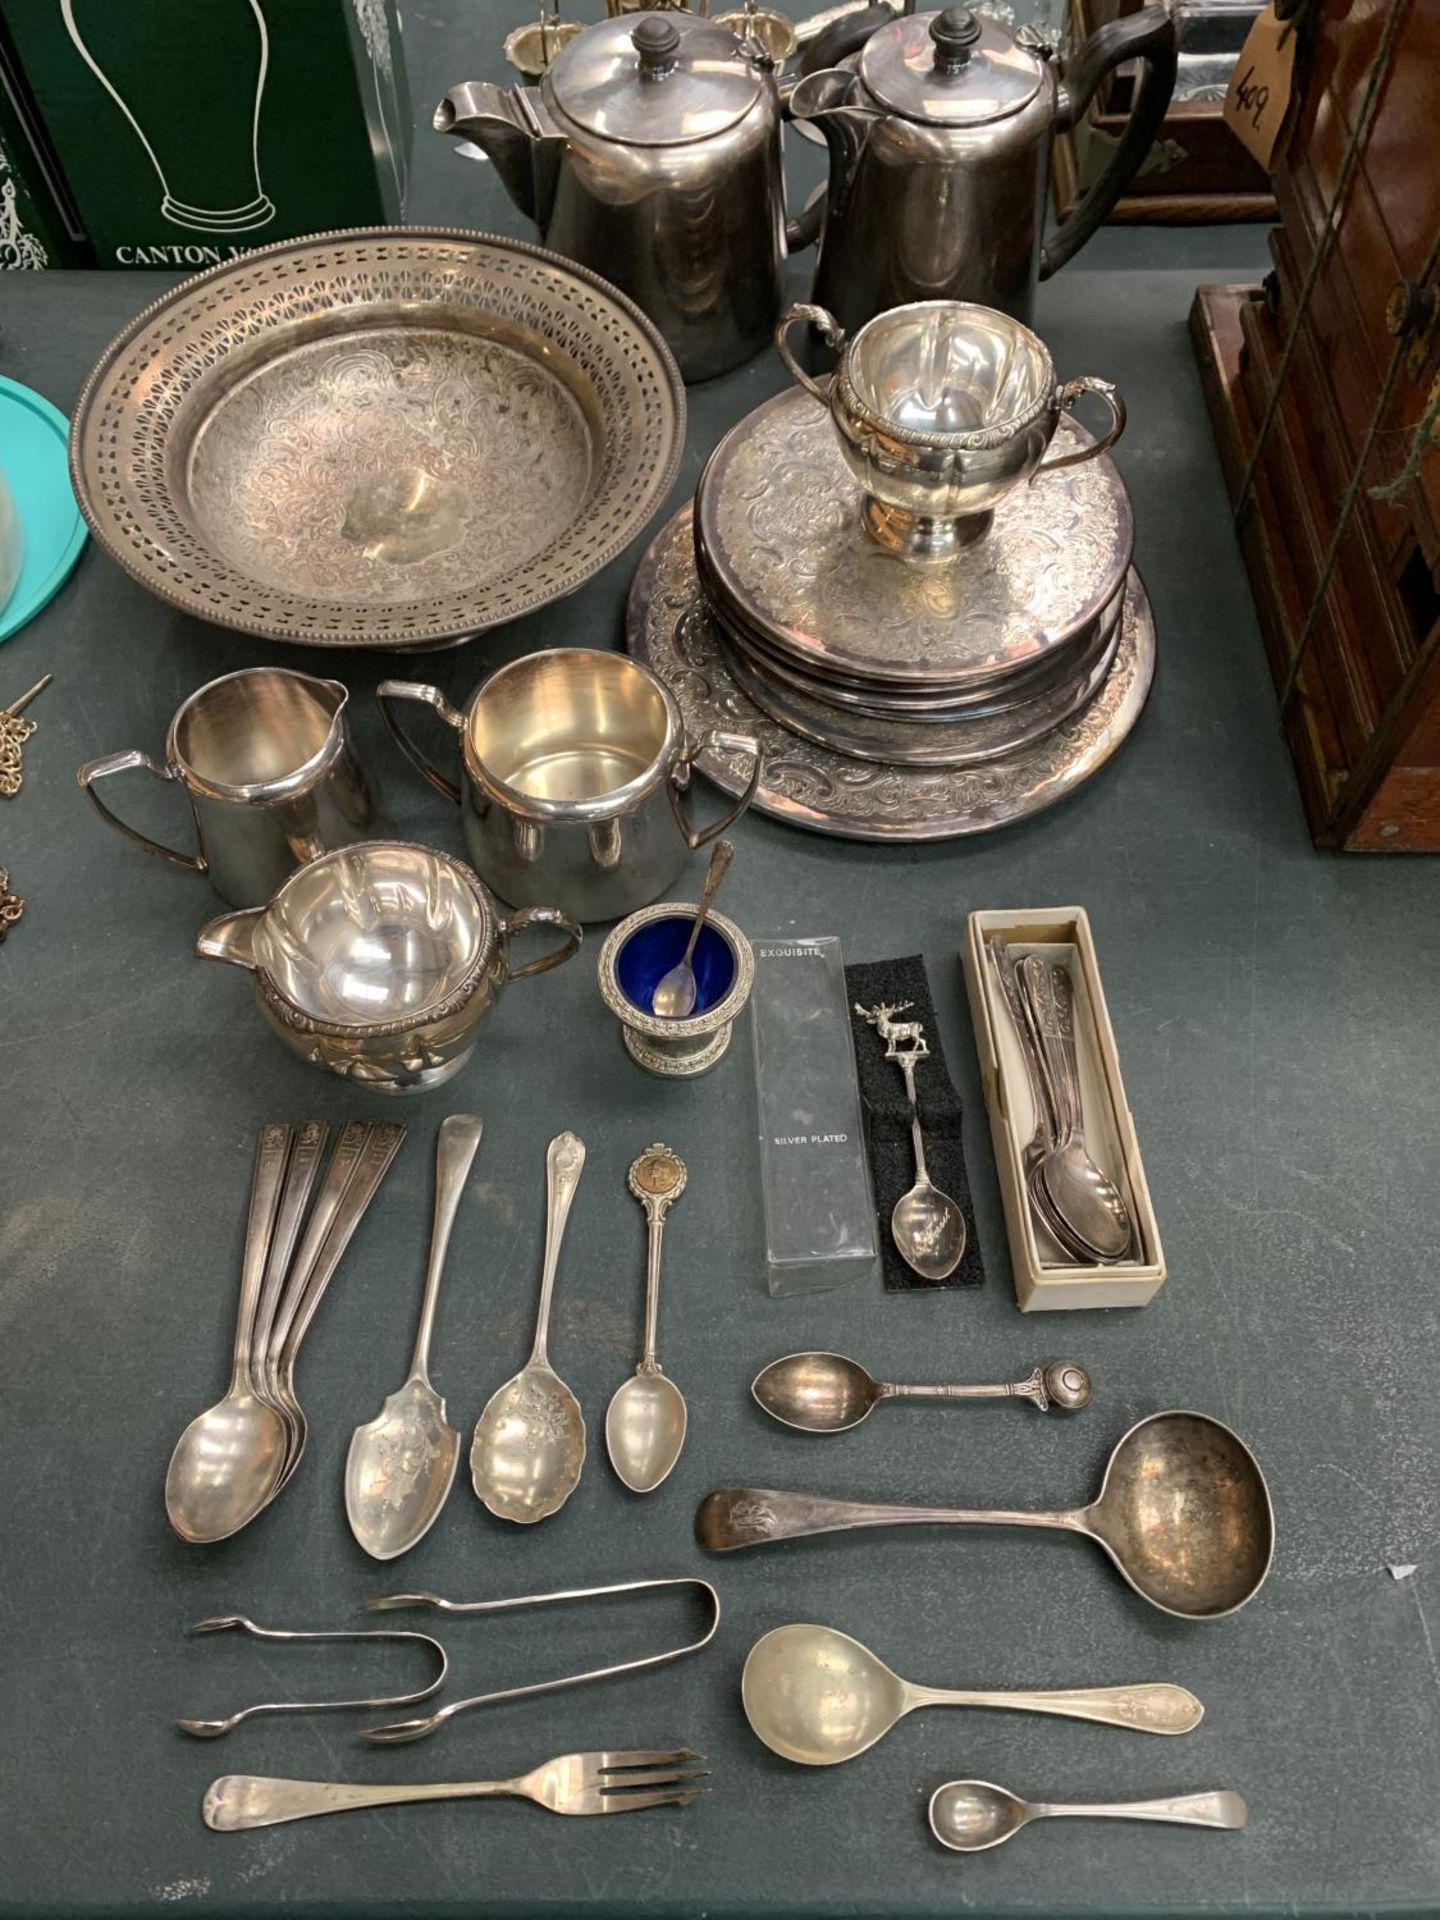 A LARGE QUANTITY OF SILVER PLATE ITEMS TO INCLUDE A COMPORT, FLATWARE, PLACE MATS ETC